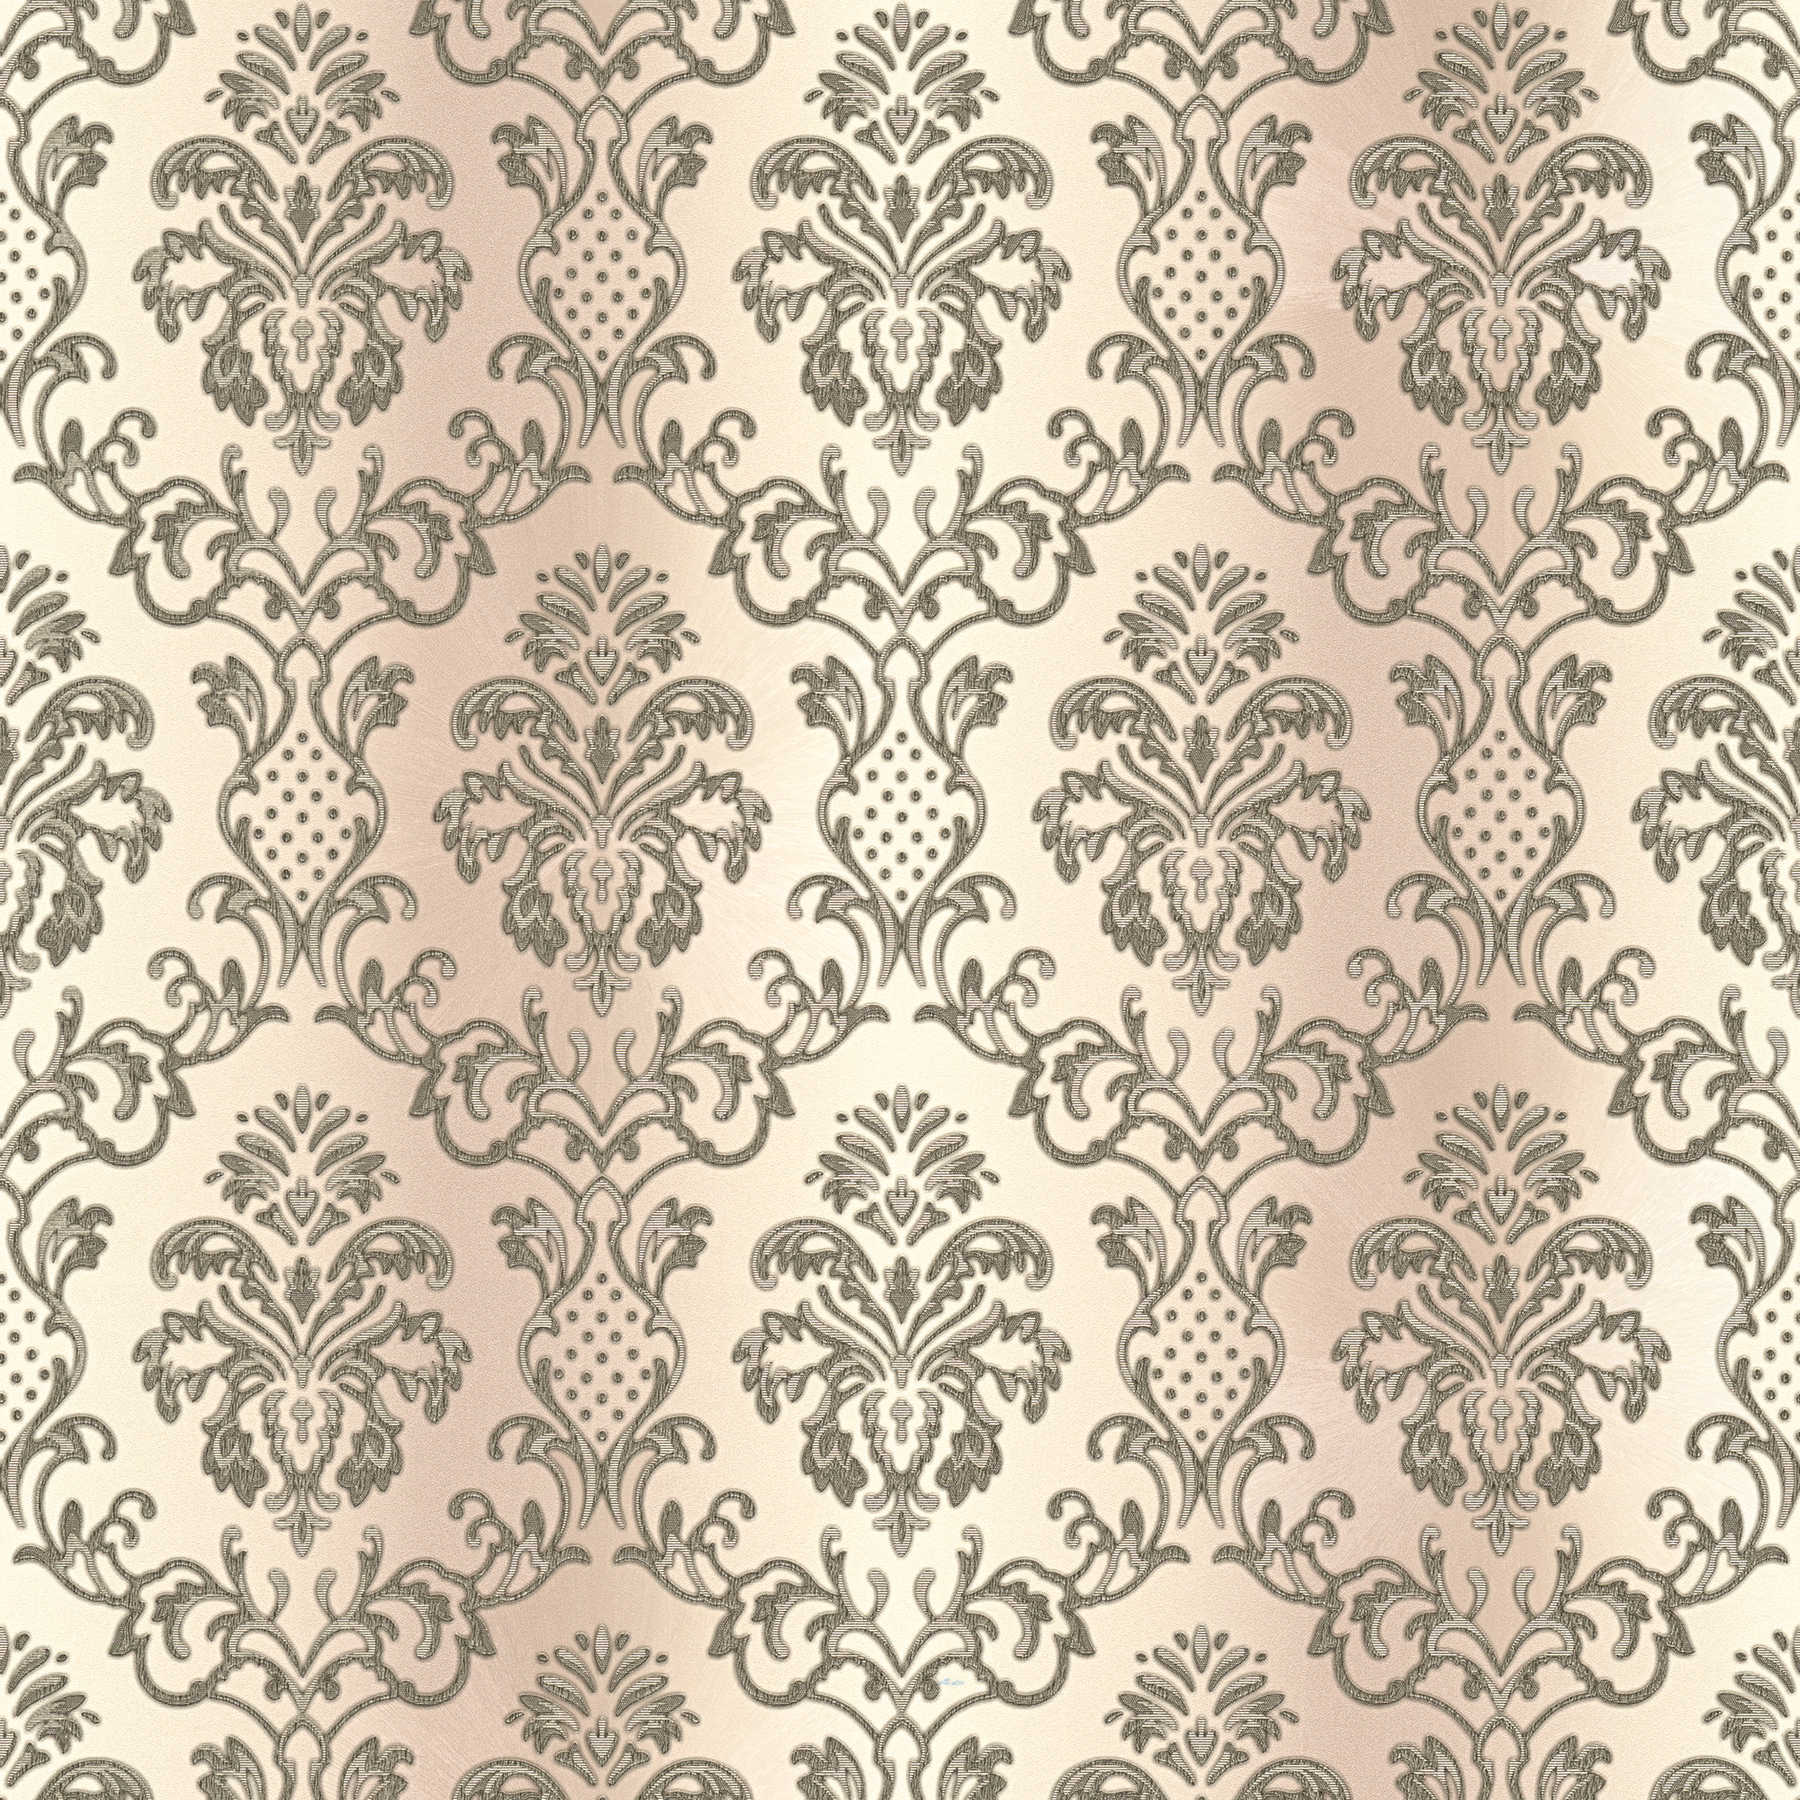 Ornaments wallpaper with brass decor in vintage style - cream
